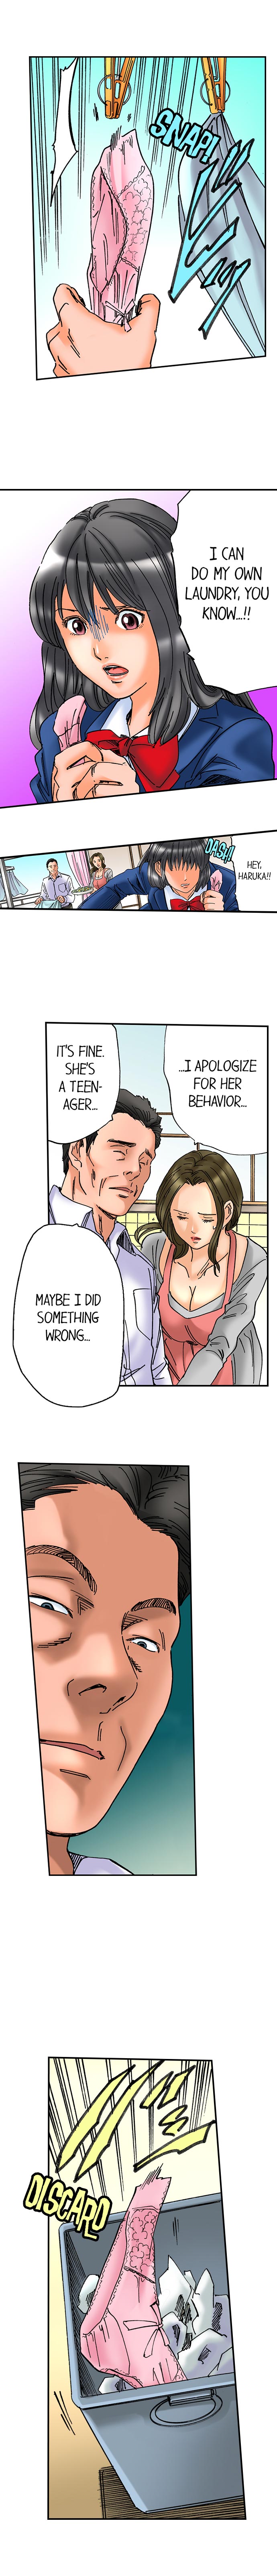 [MAI] A Step-Father Aims His Daughter Ch. 3 [ENG] 